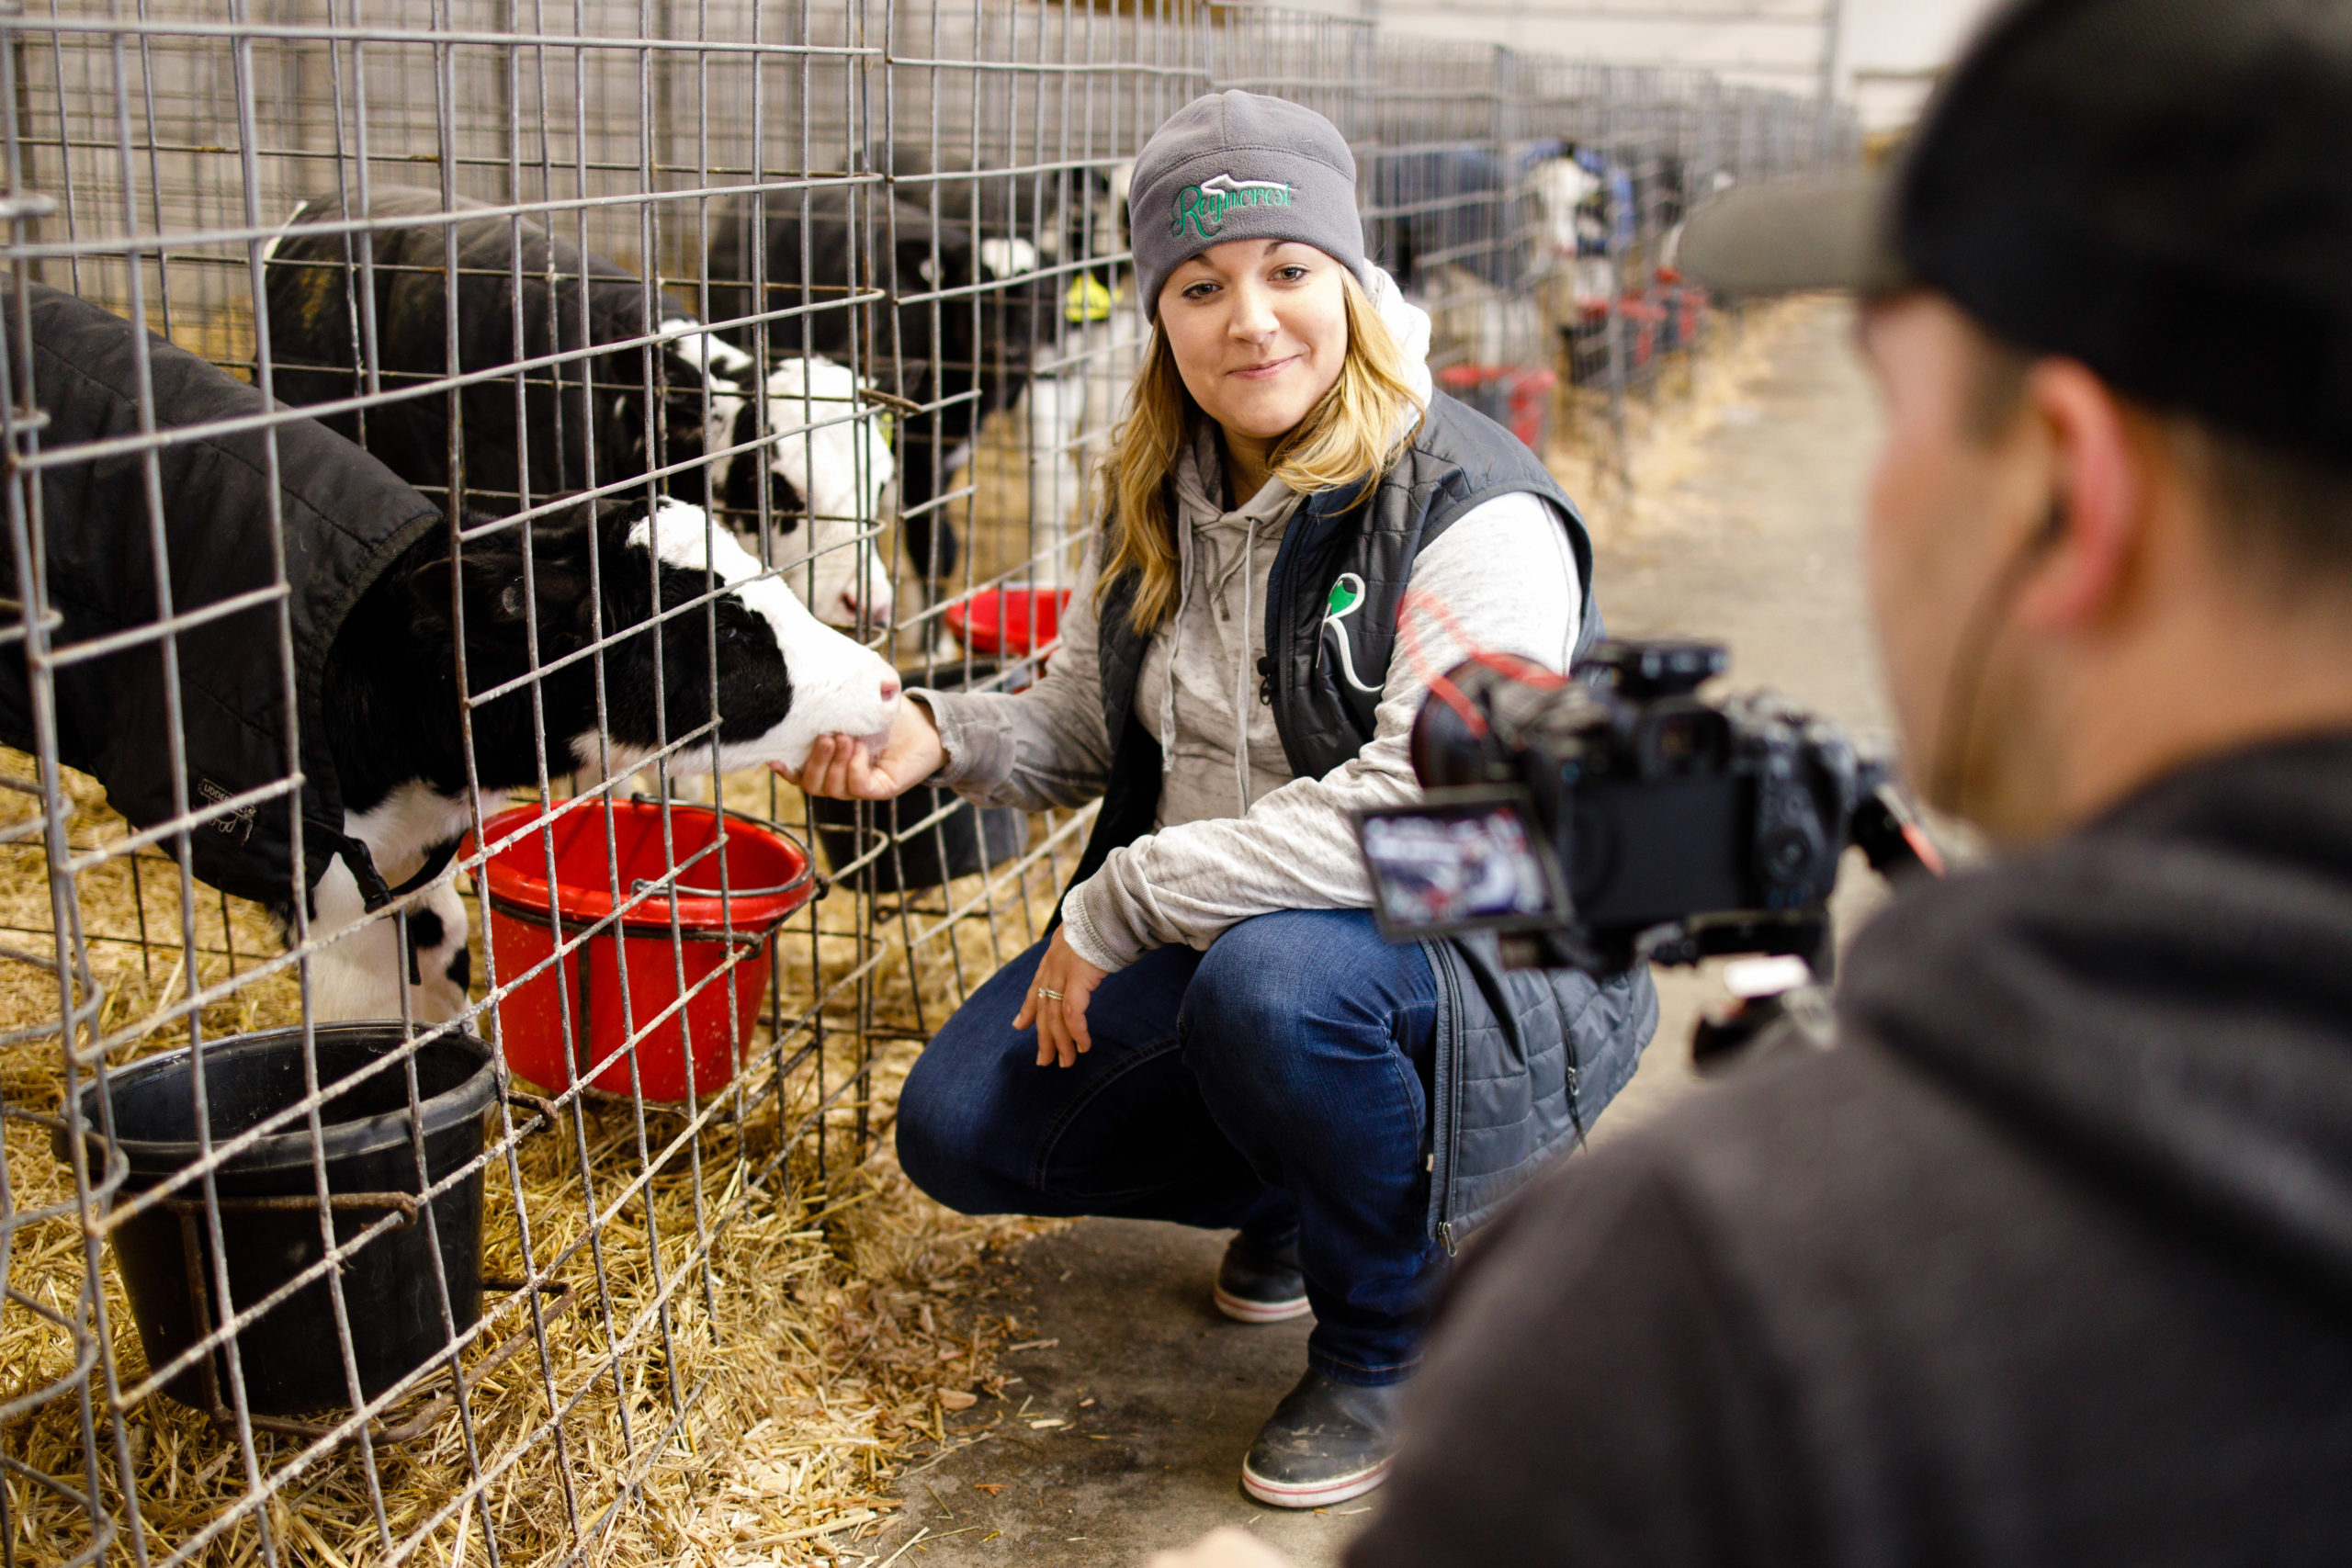 Students Can Visit a New York Dairy Farm Without Leaving Their Classroom